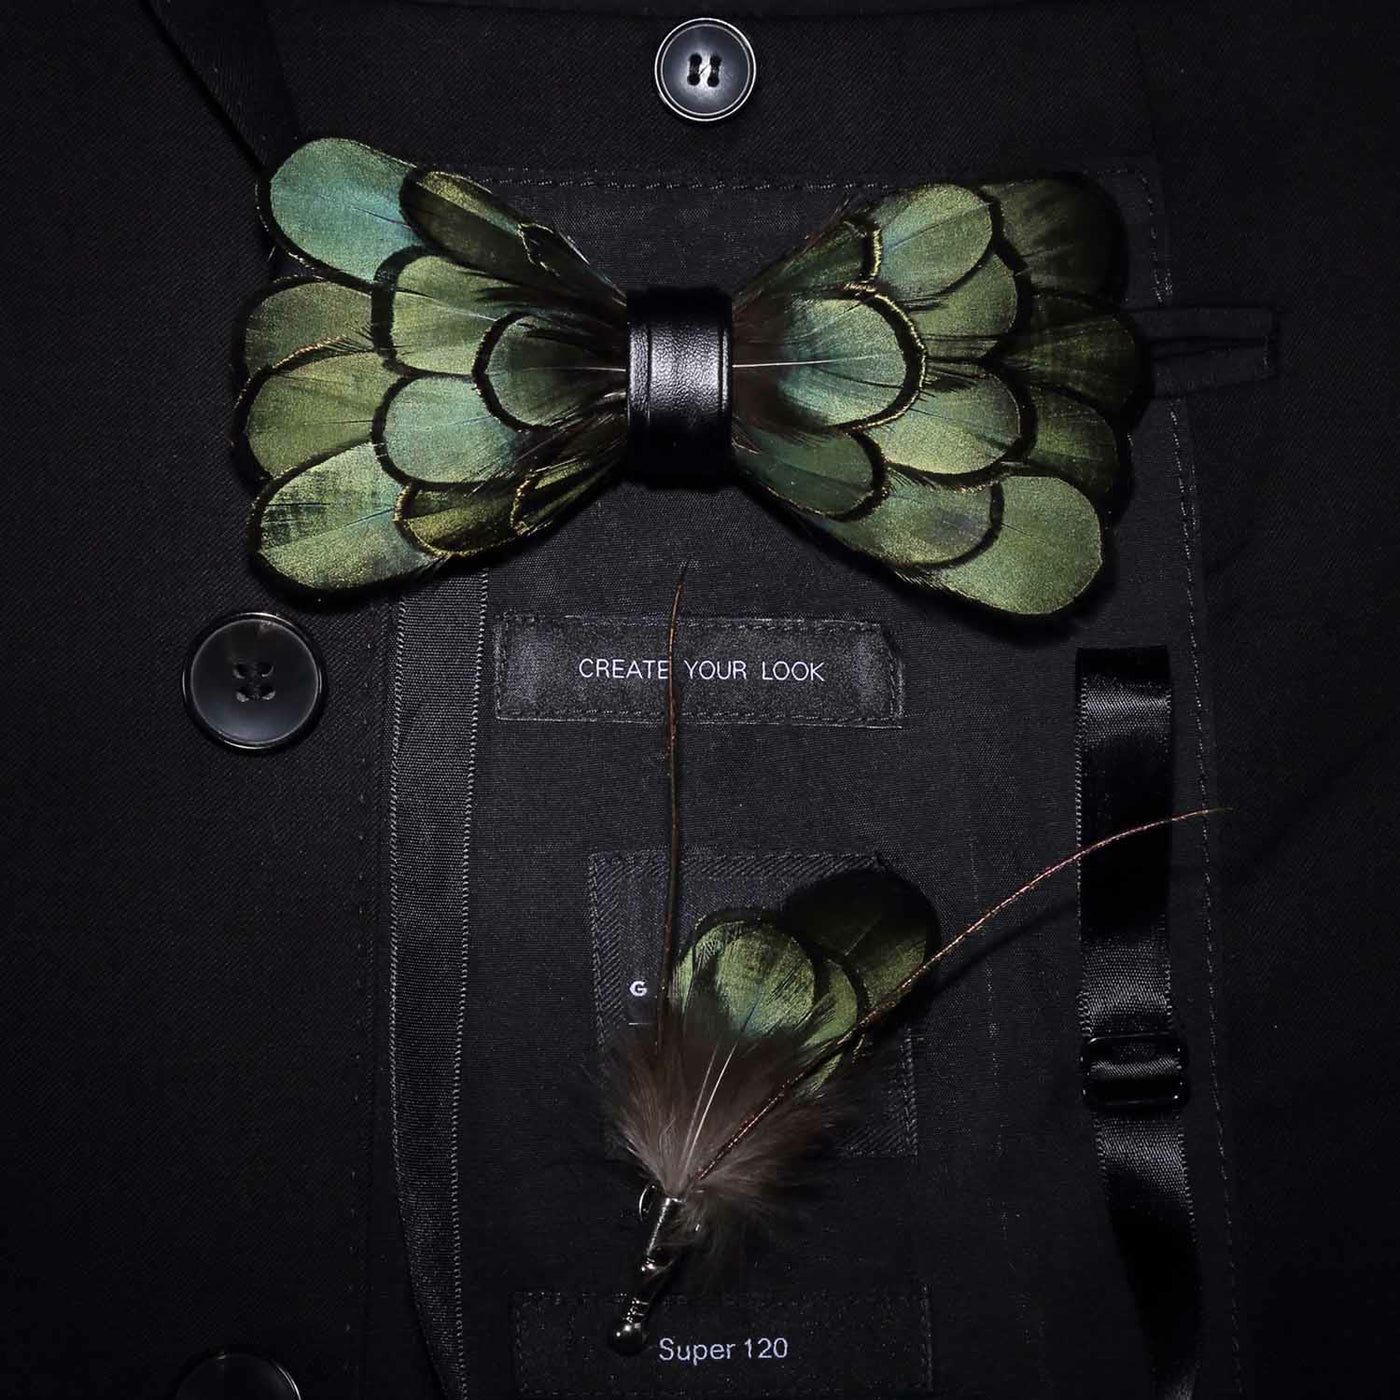 Kid's DarkOliveGreen Classic Feather Bow Tie with Lapel Pin